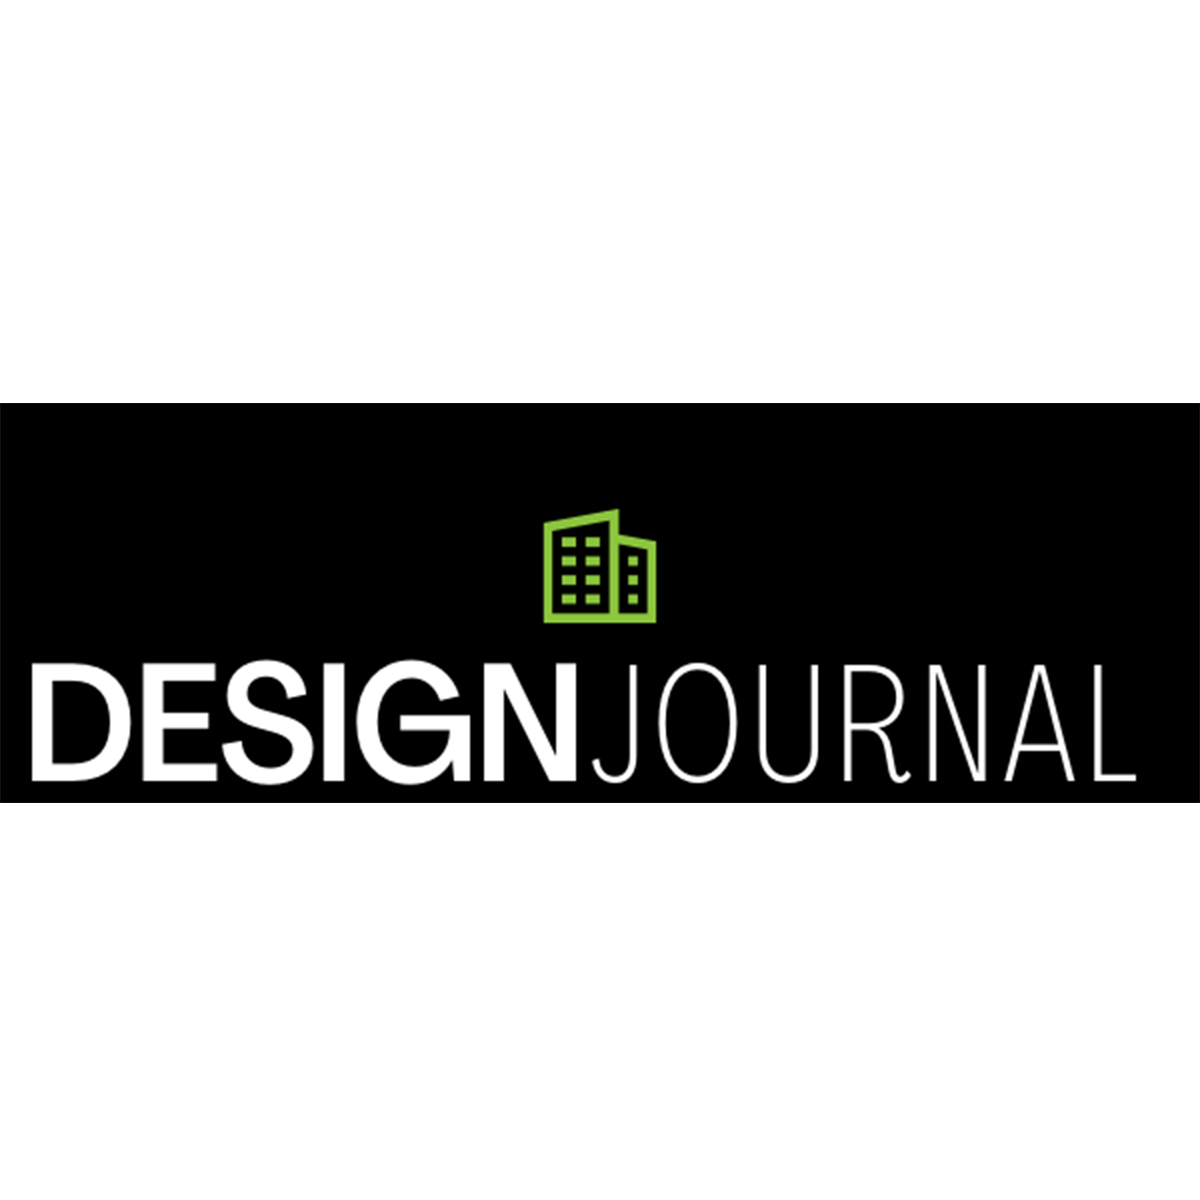 Design Journal Best of 2020 Products Award